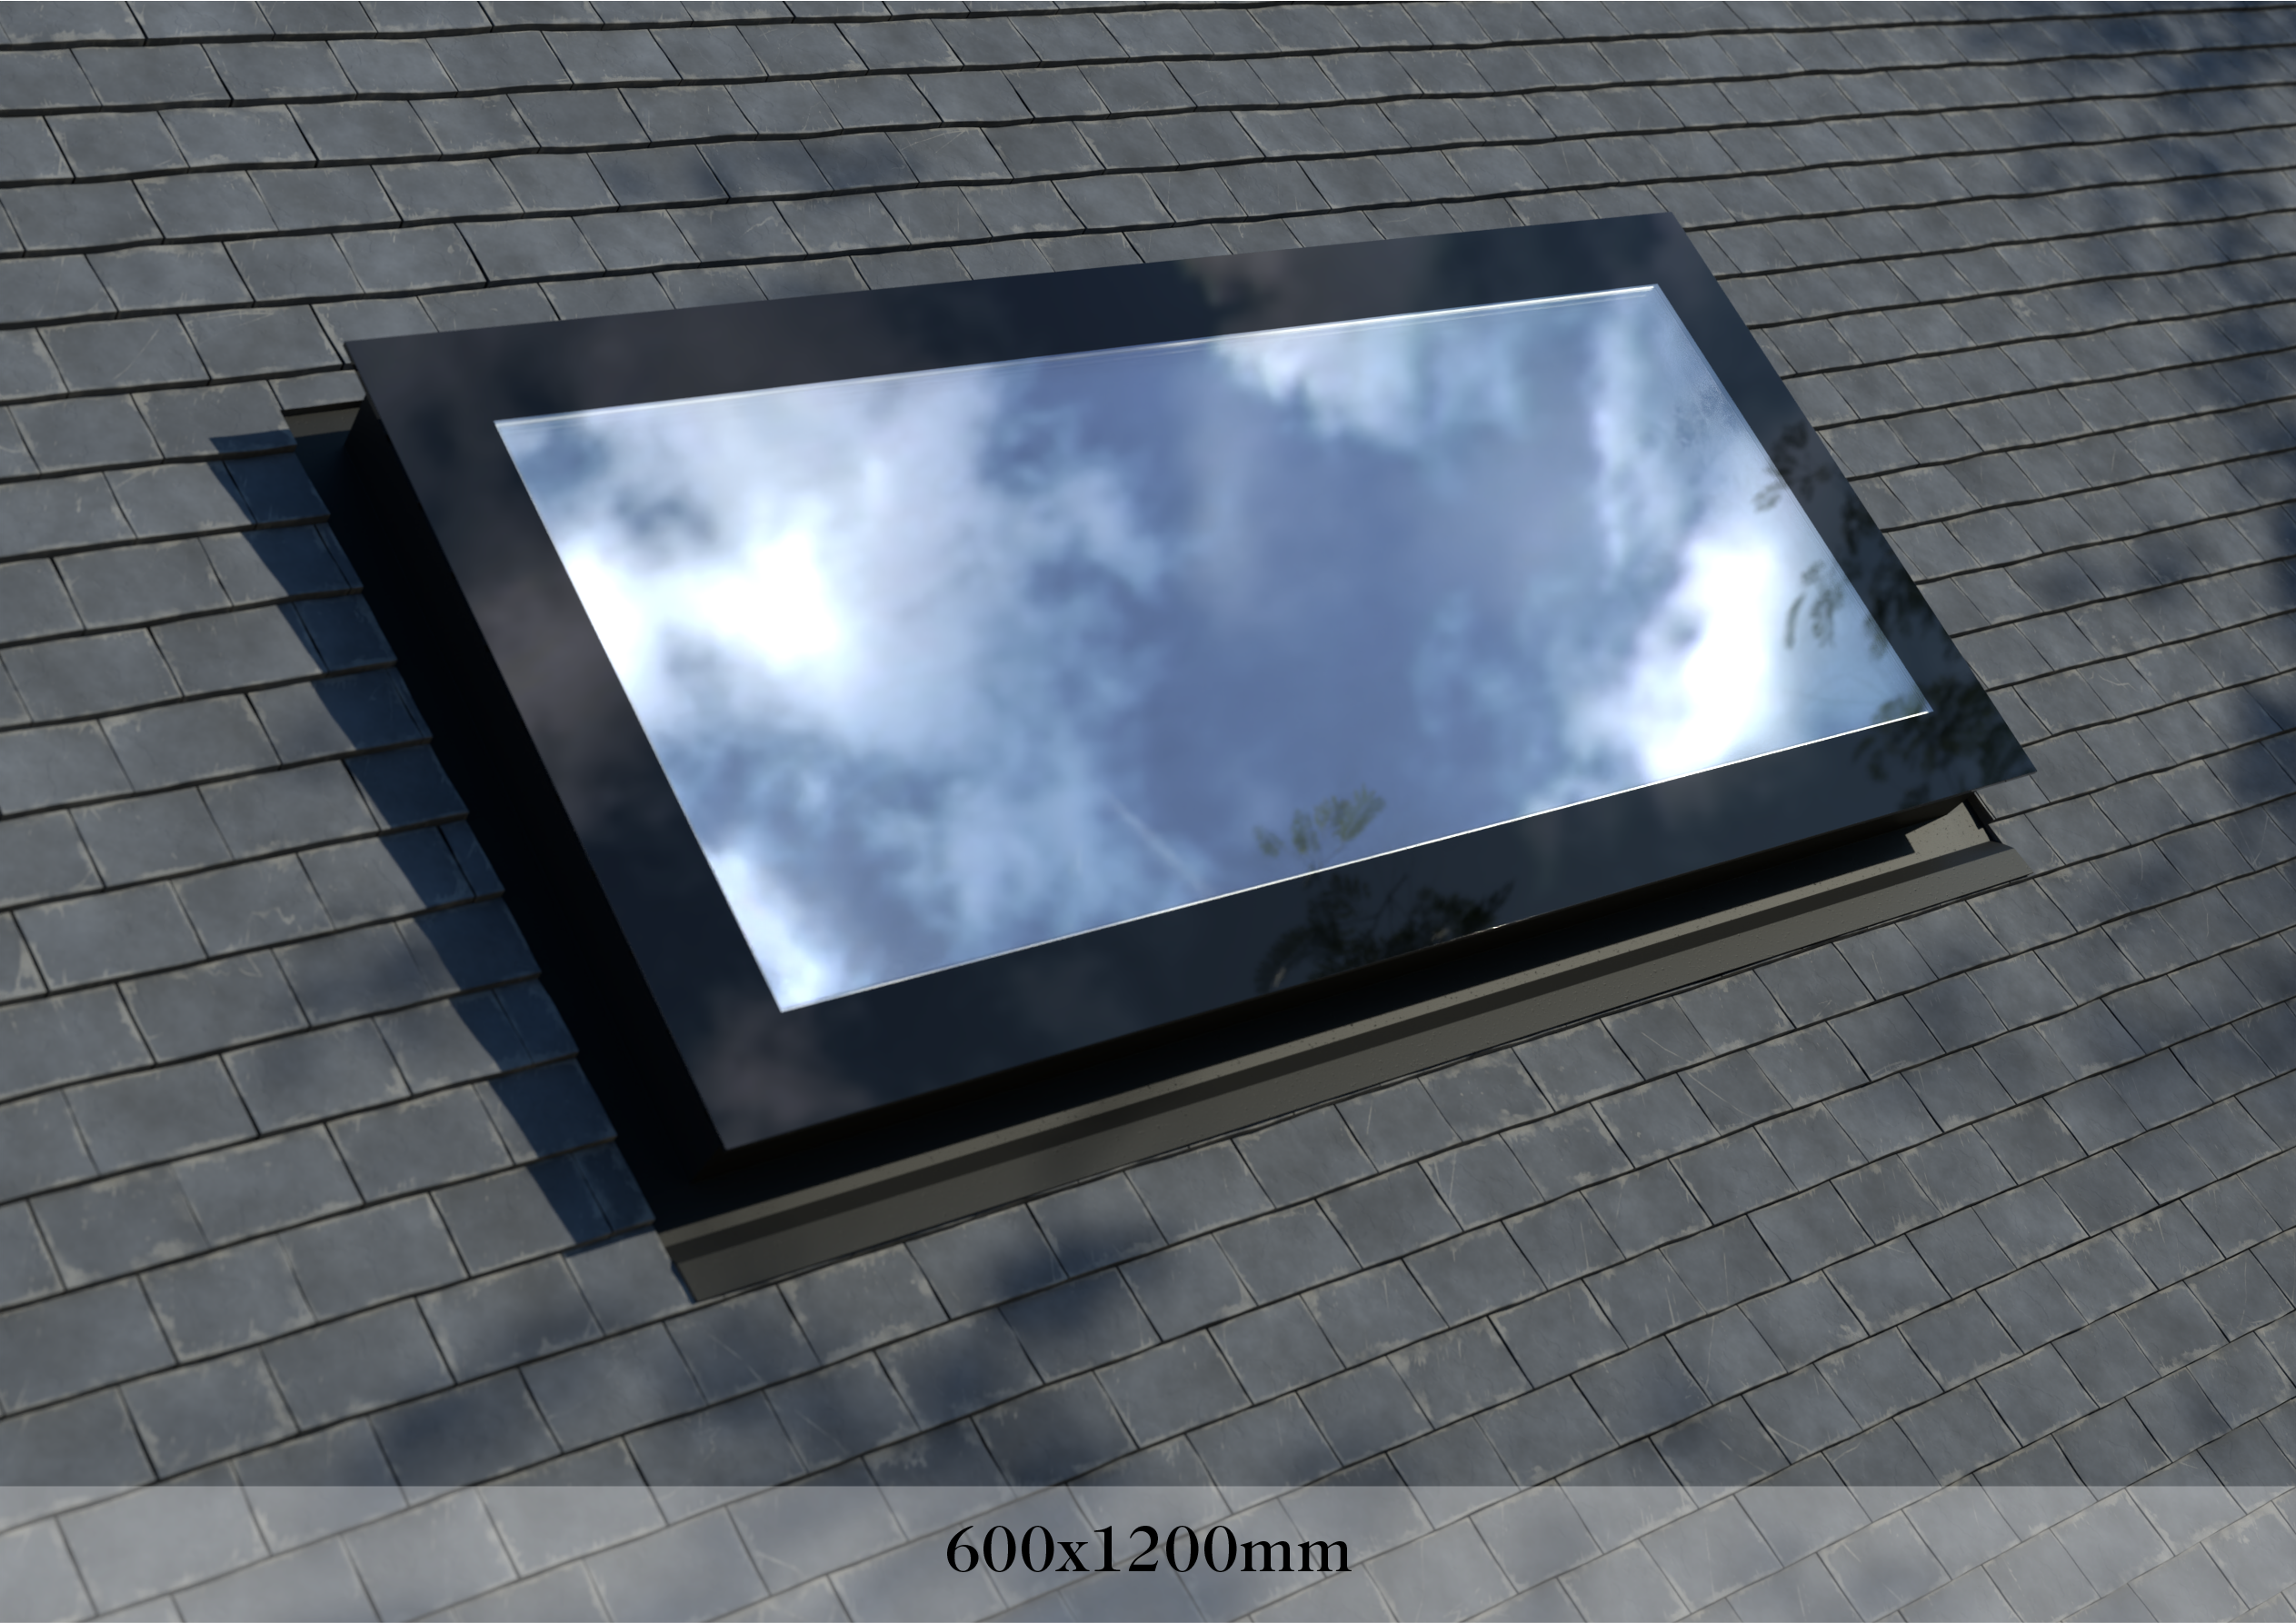 Pitched Roof Skylight 600 x 1200 mm